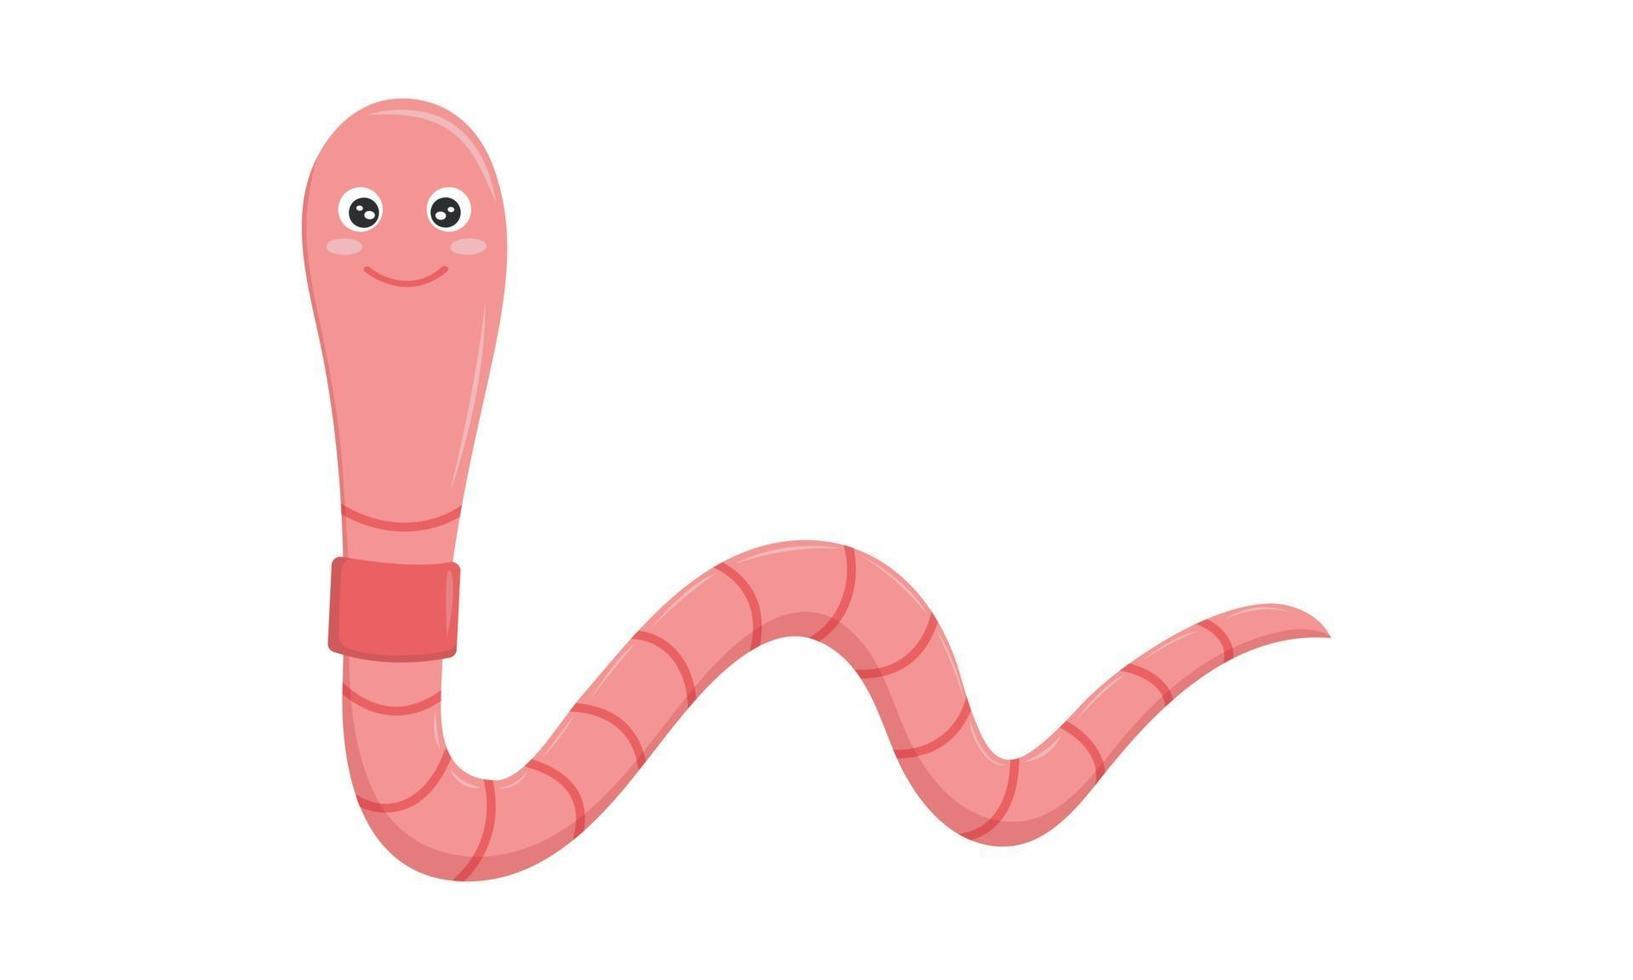 Cute worm character isolated on white background. Earthworm with smiling face in childish style vector